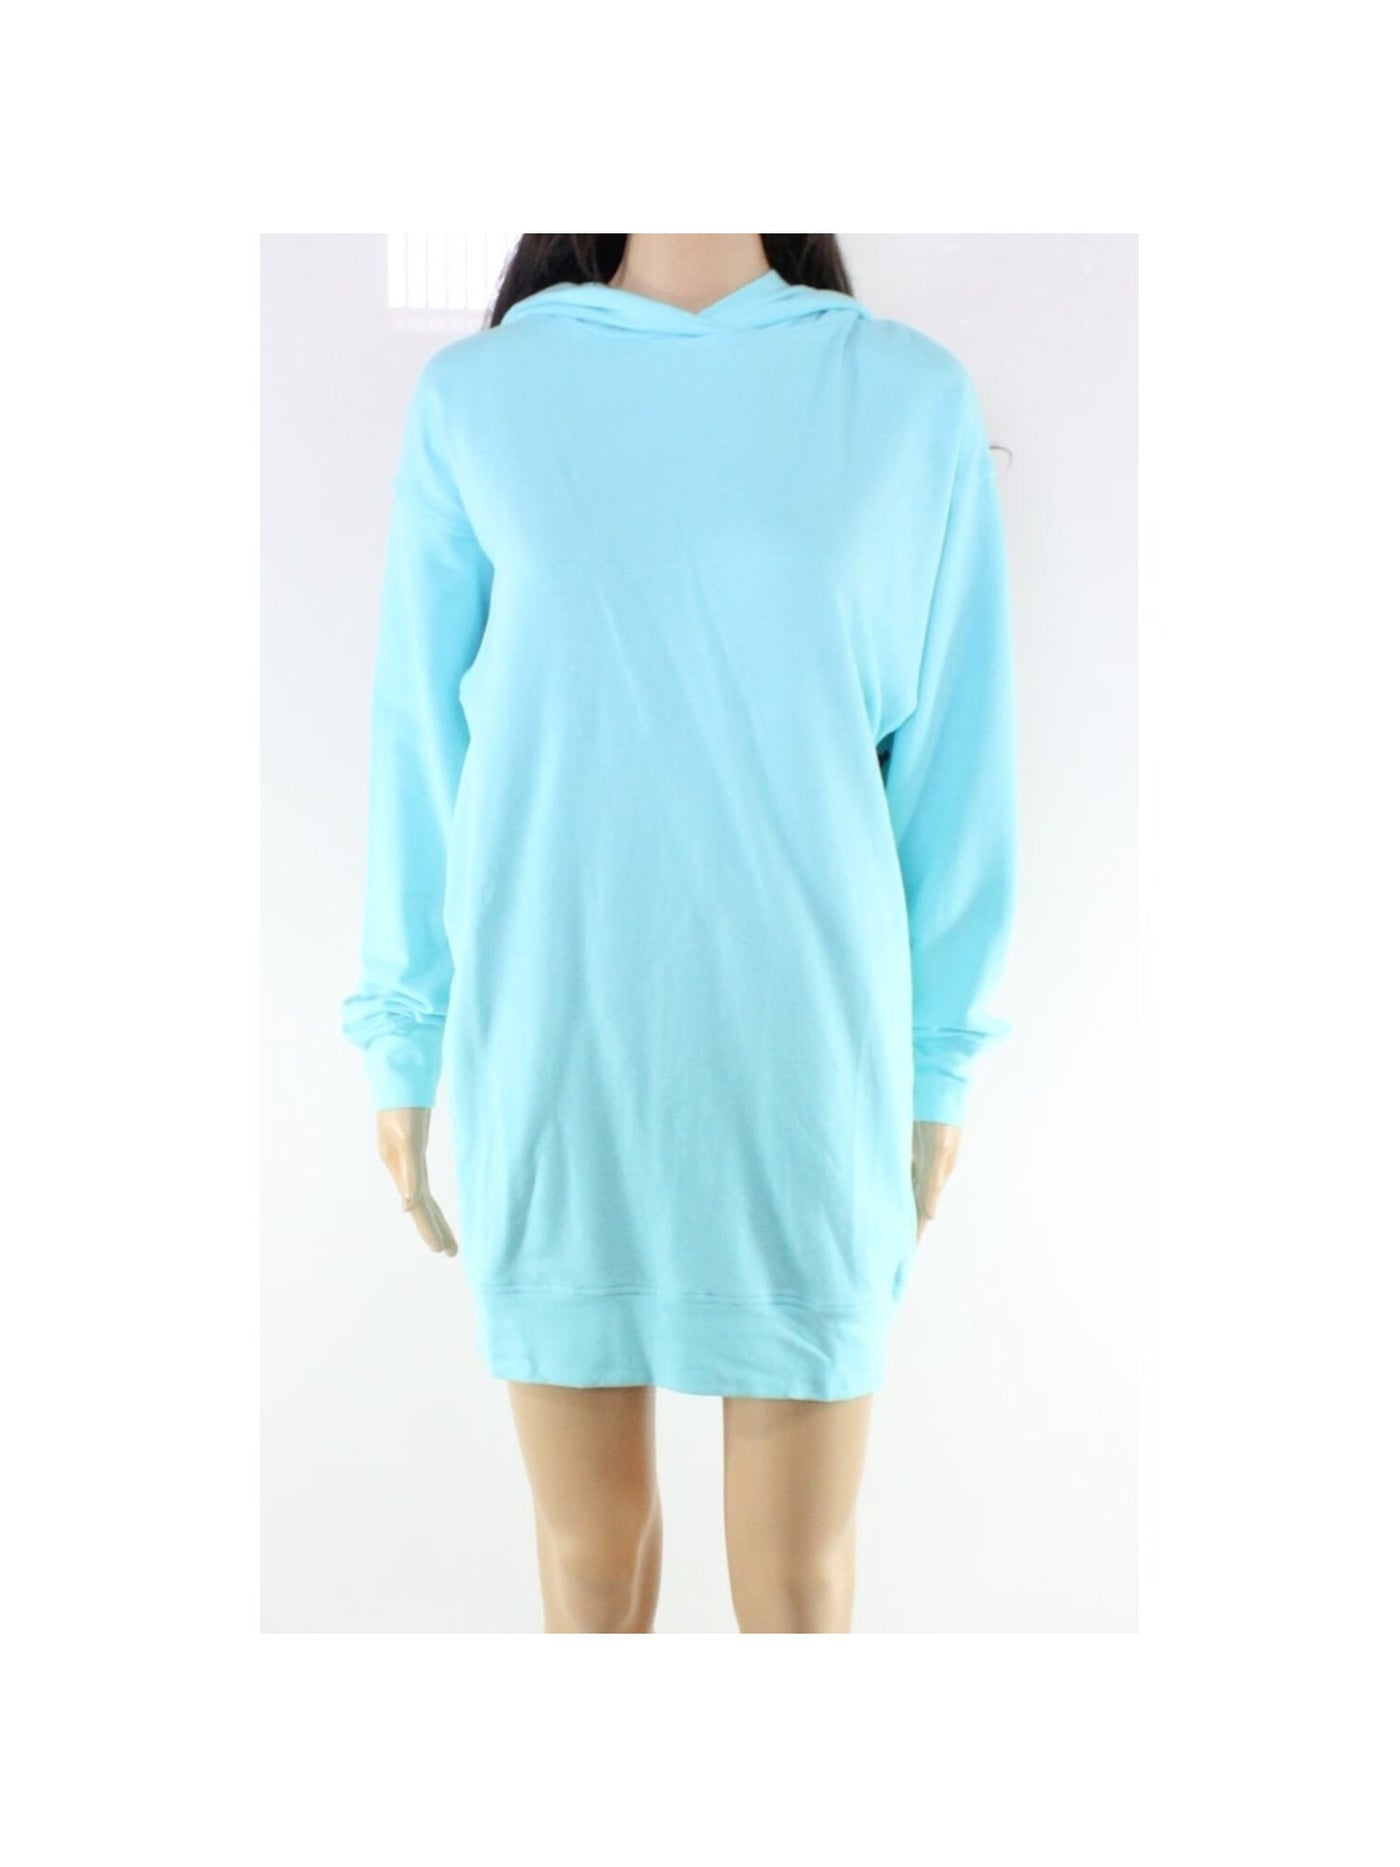 BAM BY BETSY & ADAM Womens Aqua Stretch Attached Hood, Pullover Long Sleeve Crew Neck Short Shift Dress S